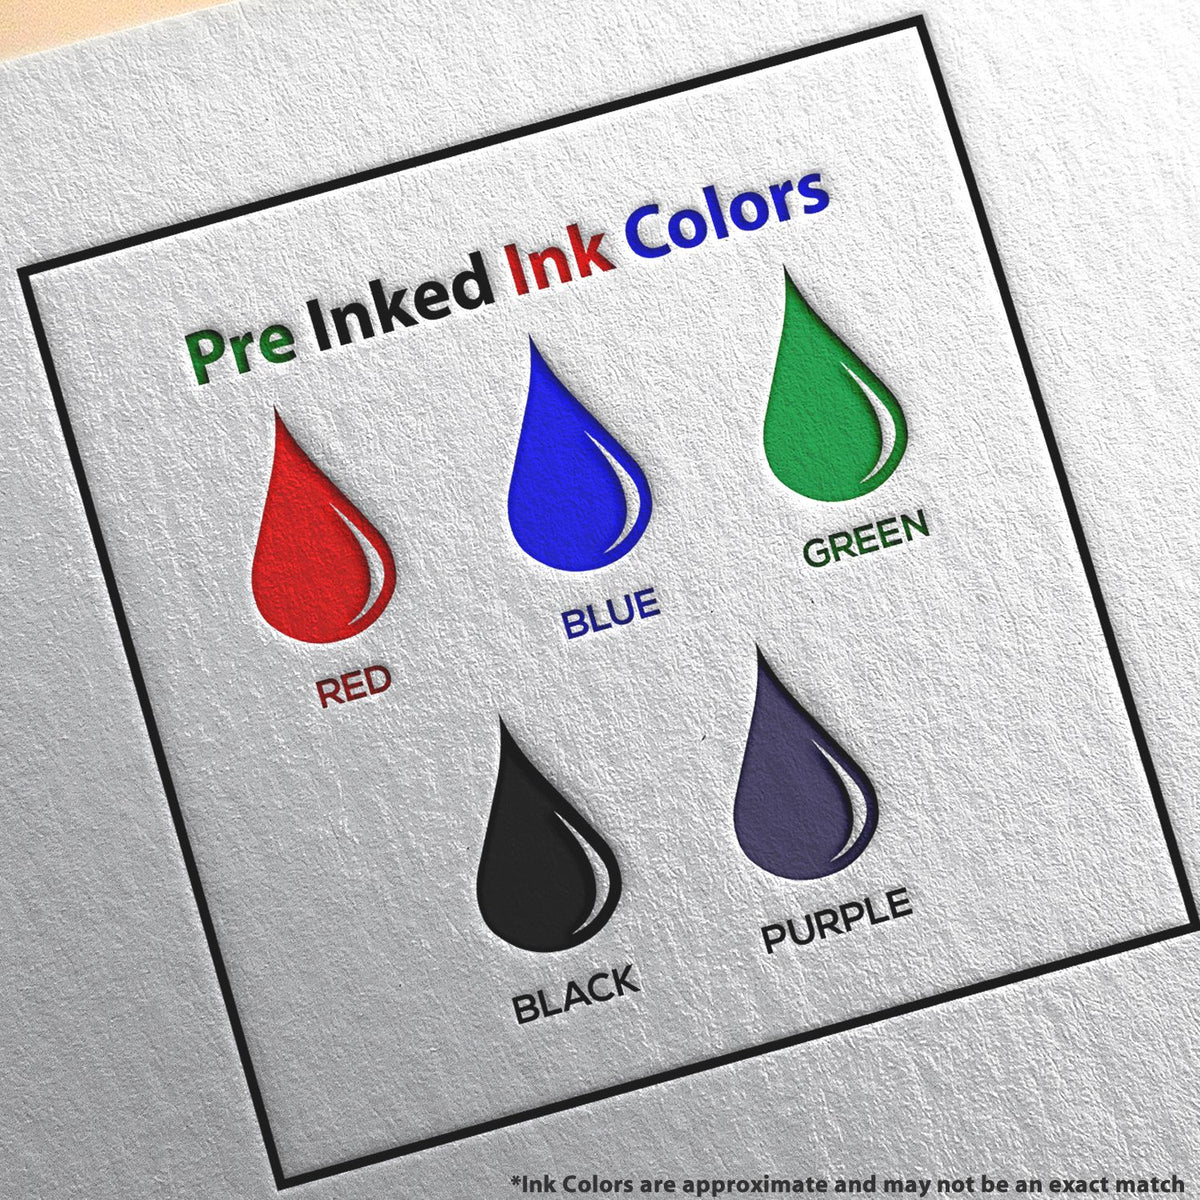 A picture showing the different ink colors or hues available for the Slim Pre-Inked Vermont Landscape Architect Seal Stamp product.